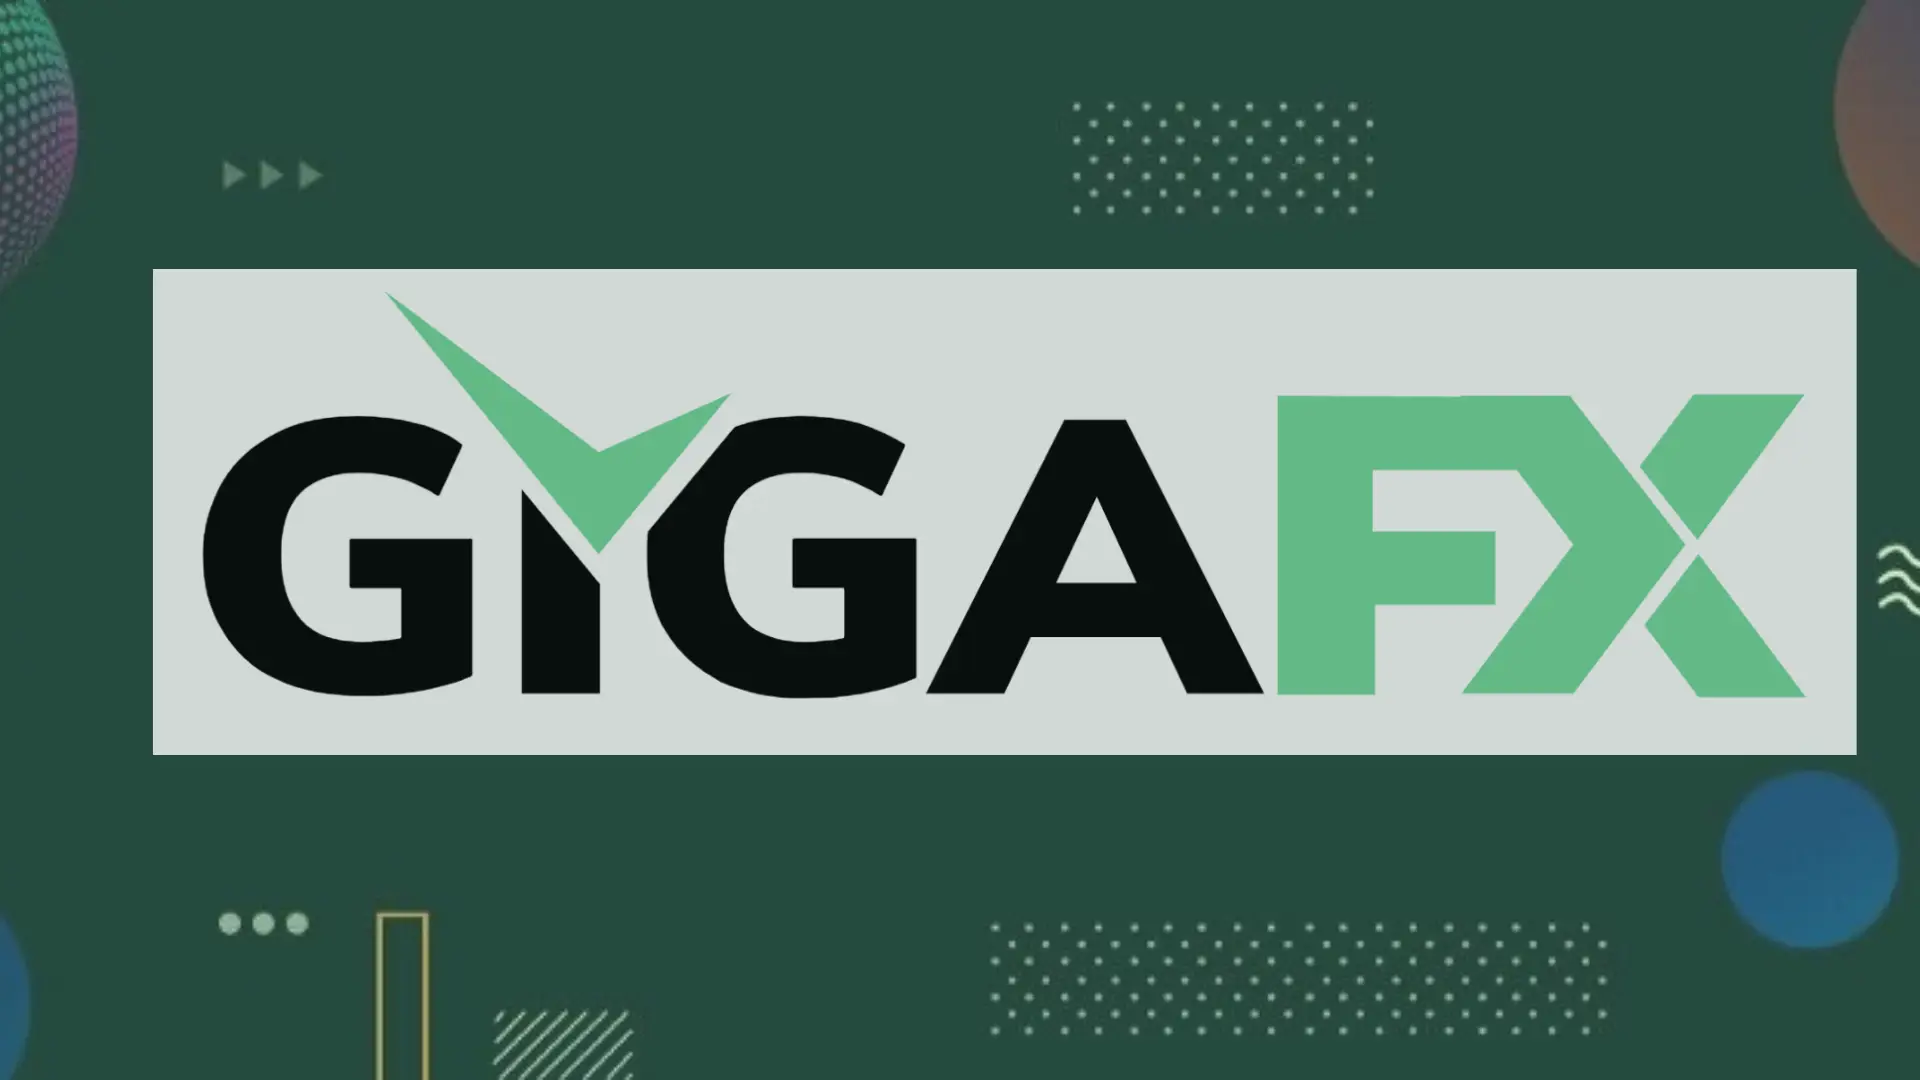 GigaFX for your profitable investment